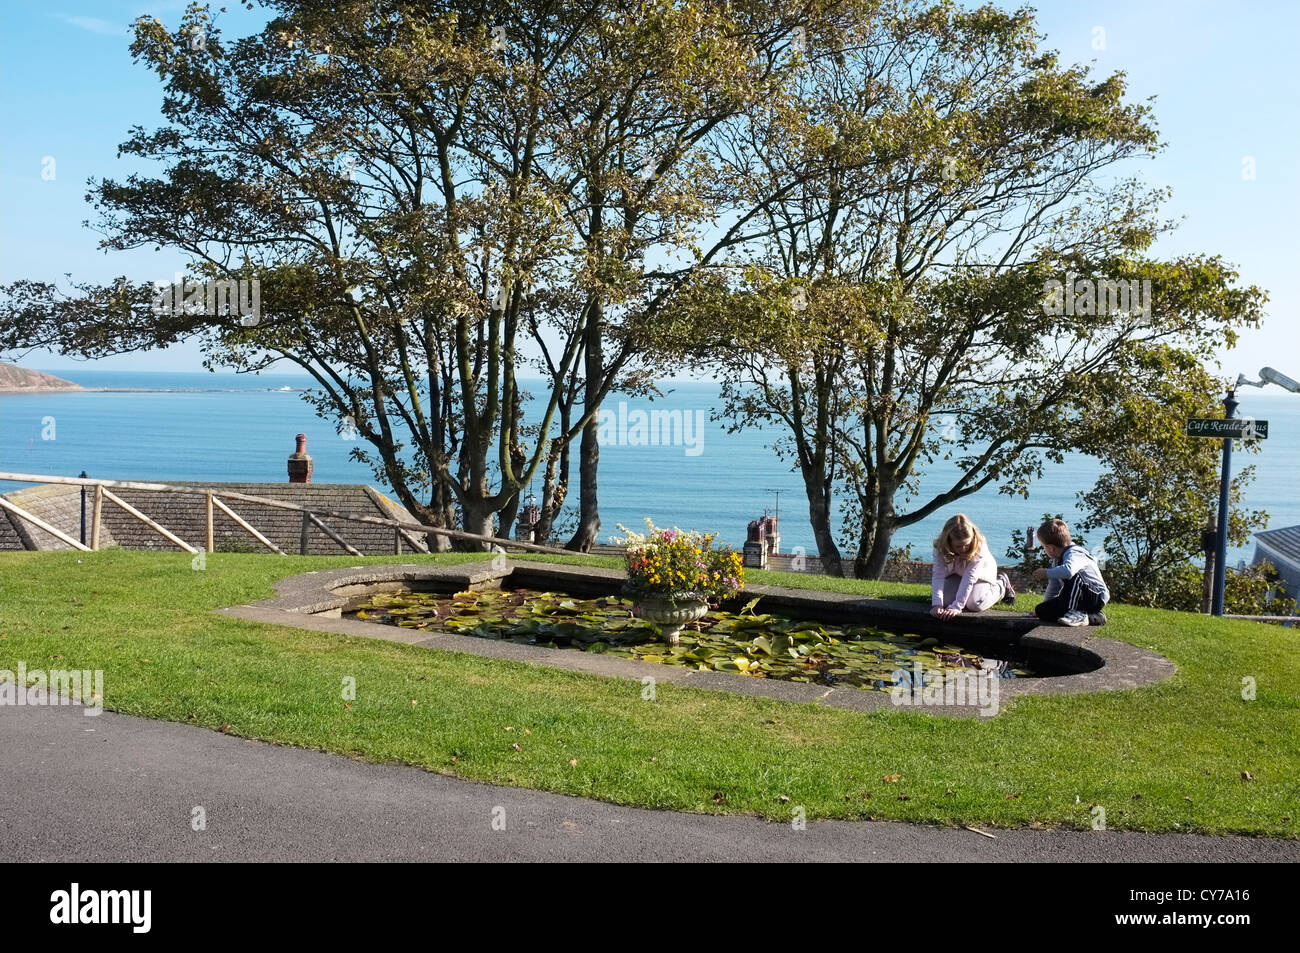 Children playing by a Lily pond on the cliff top at Filey, Yorkshire. Stock Photo